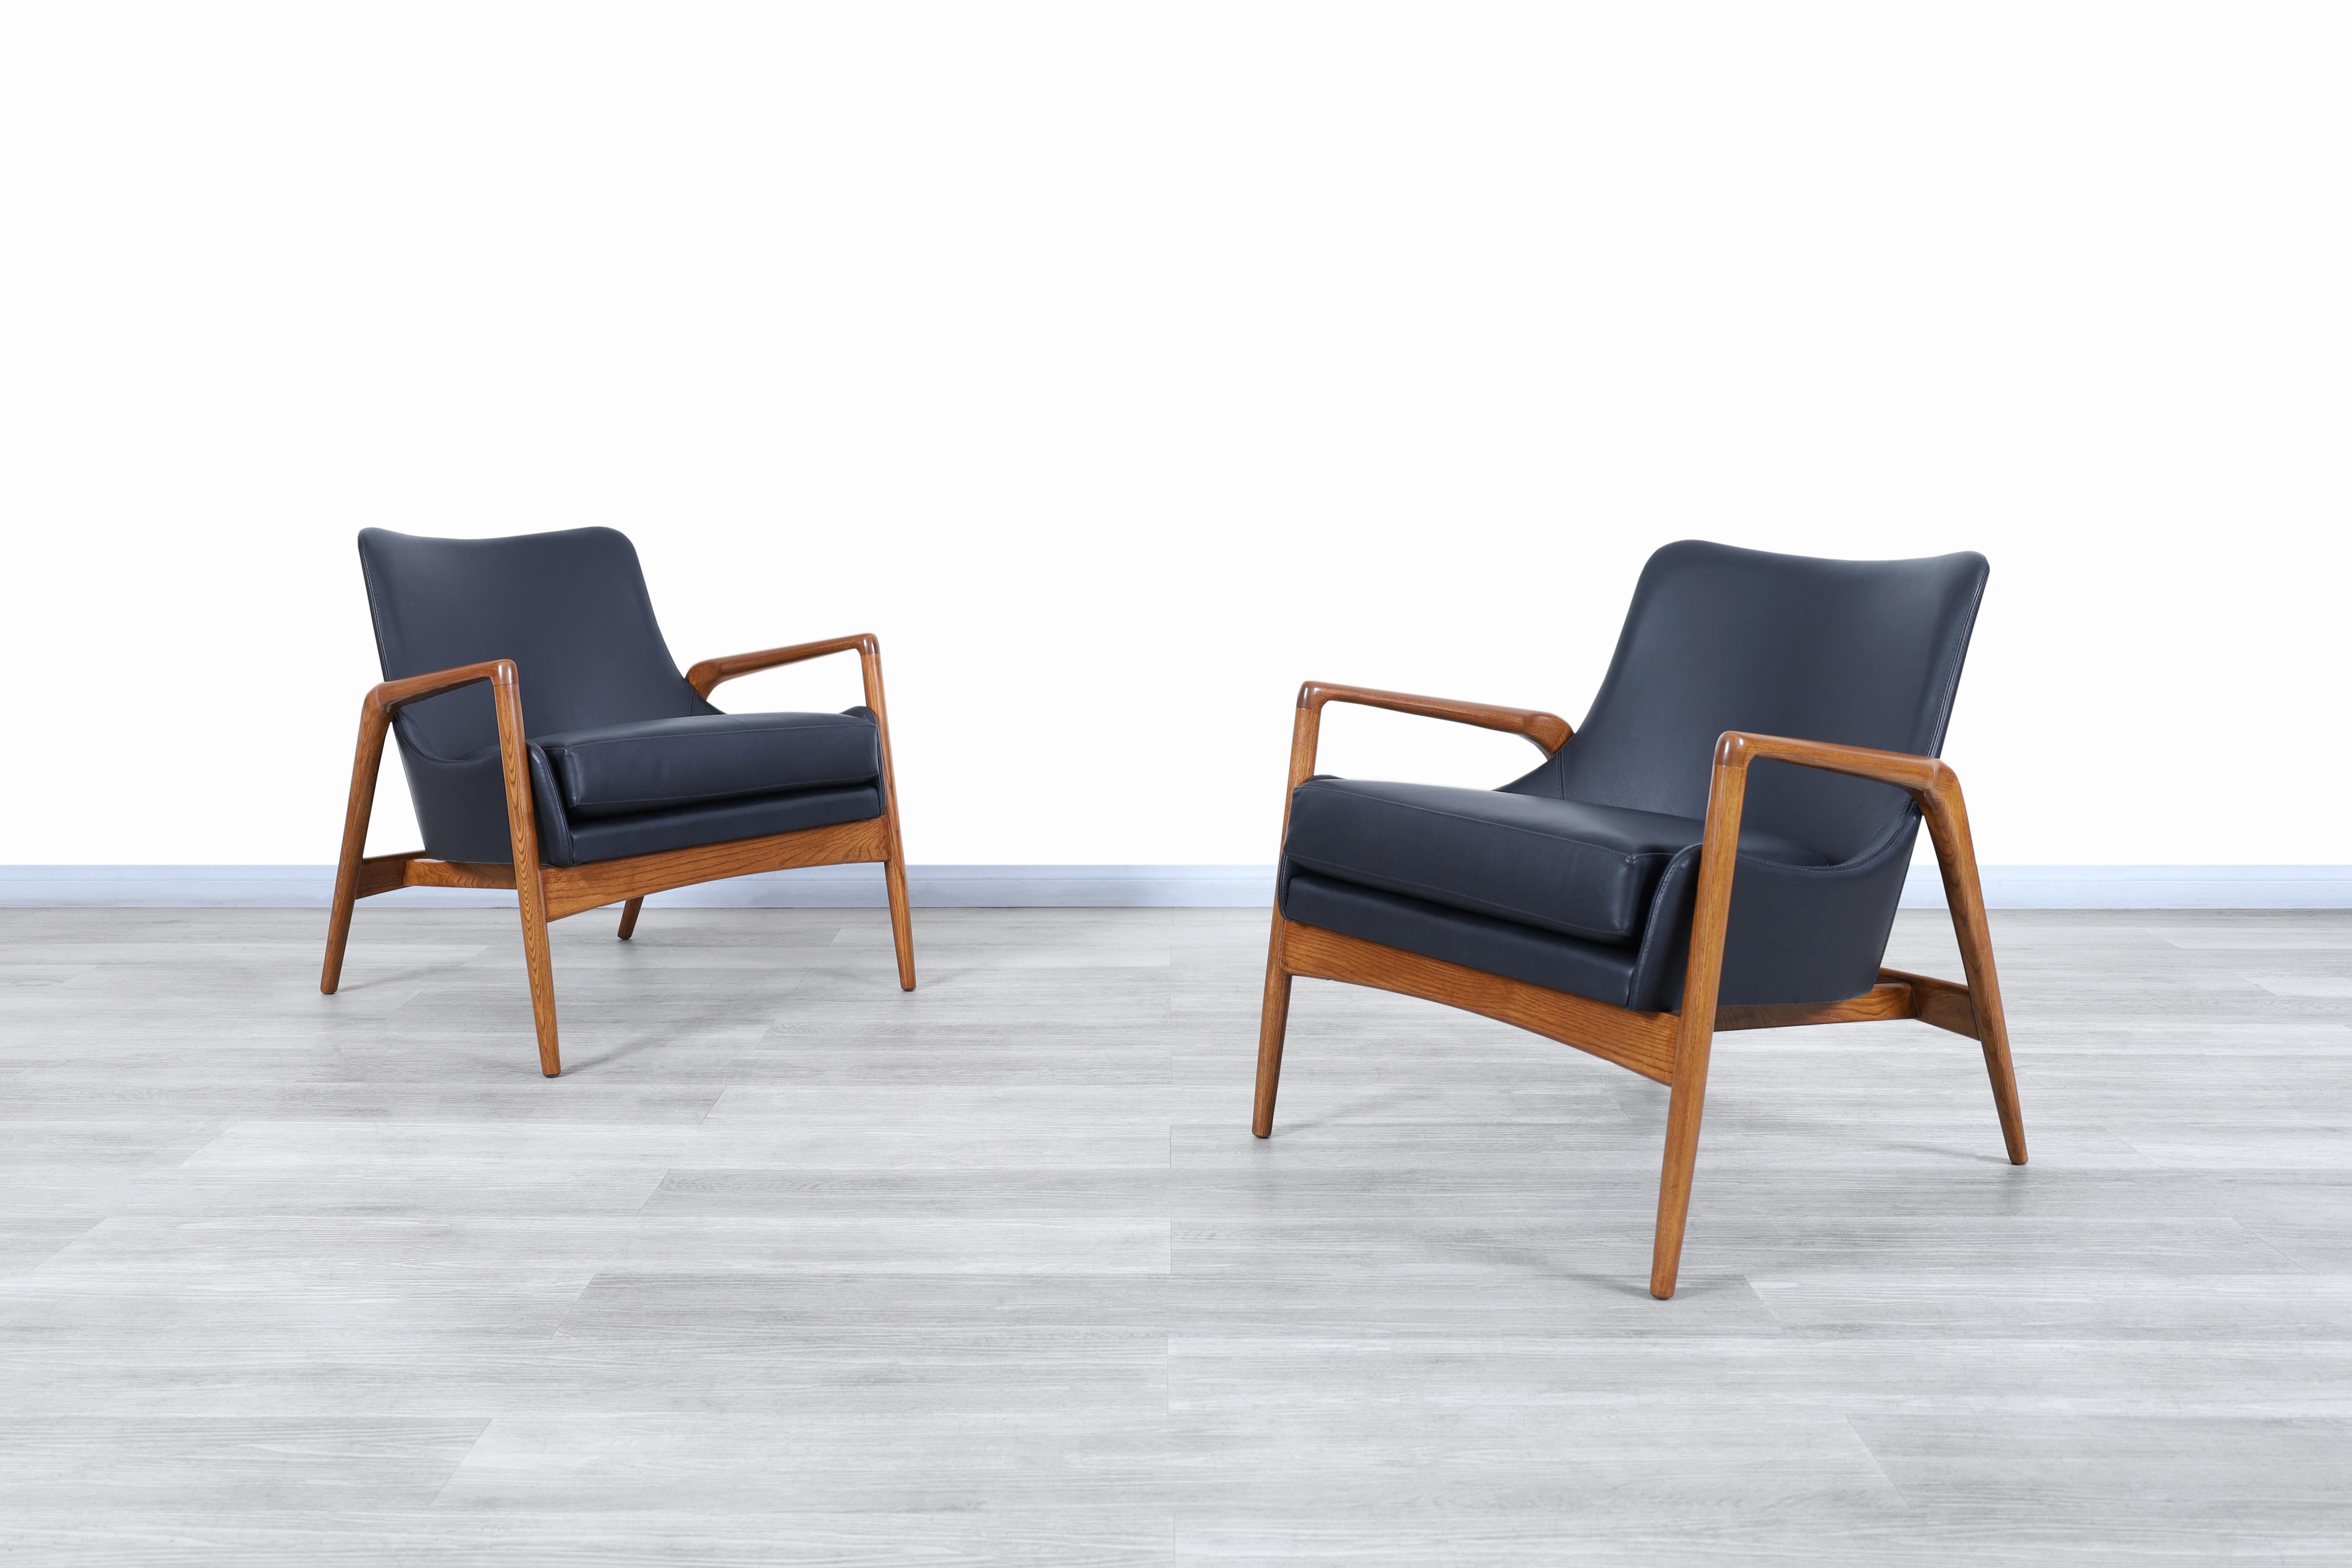 Wonderful Danish modern leather lounge chairs designed by Ib Kofod Larsen for Selig in Denmark, circa 1950s. The sculptural frames on these chairs are made of solid walnut stain. The well-crafted armrests and barrel shape design shows beautiful